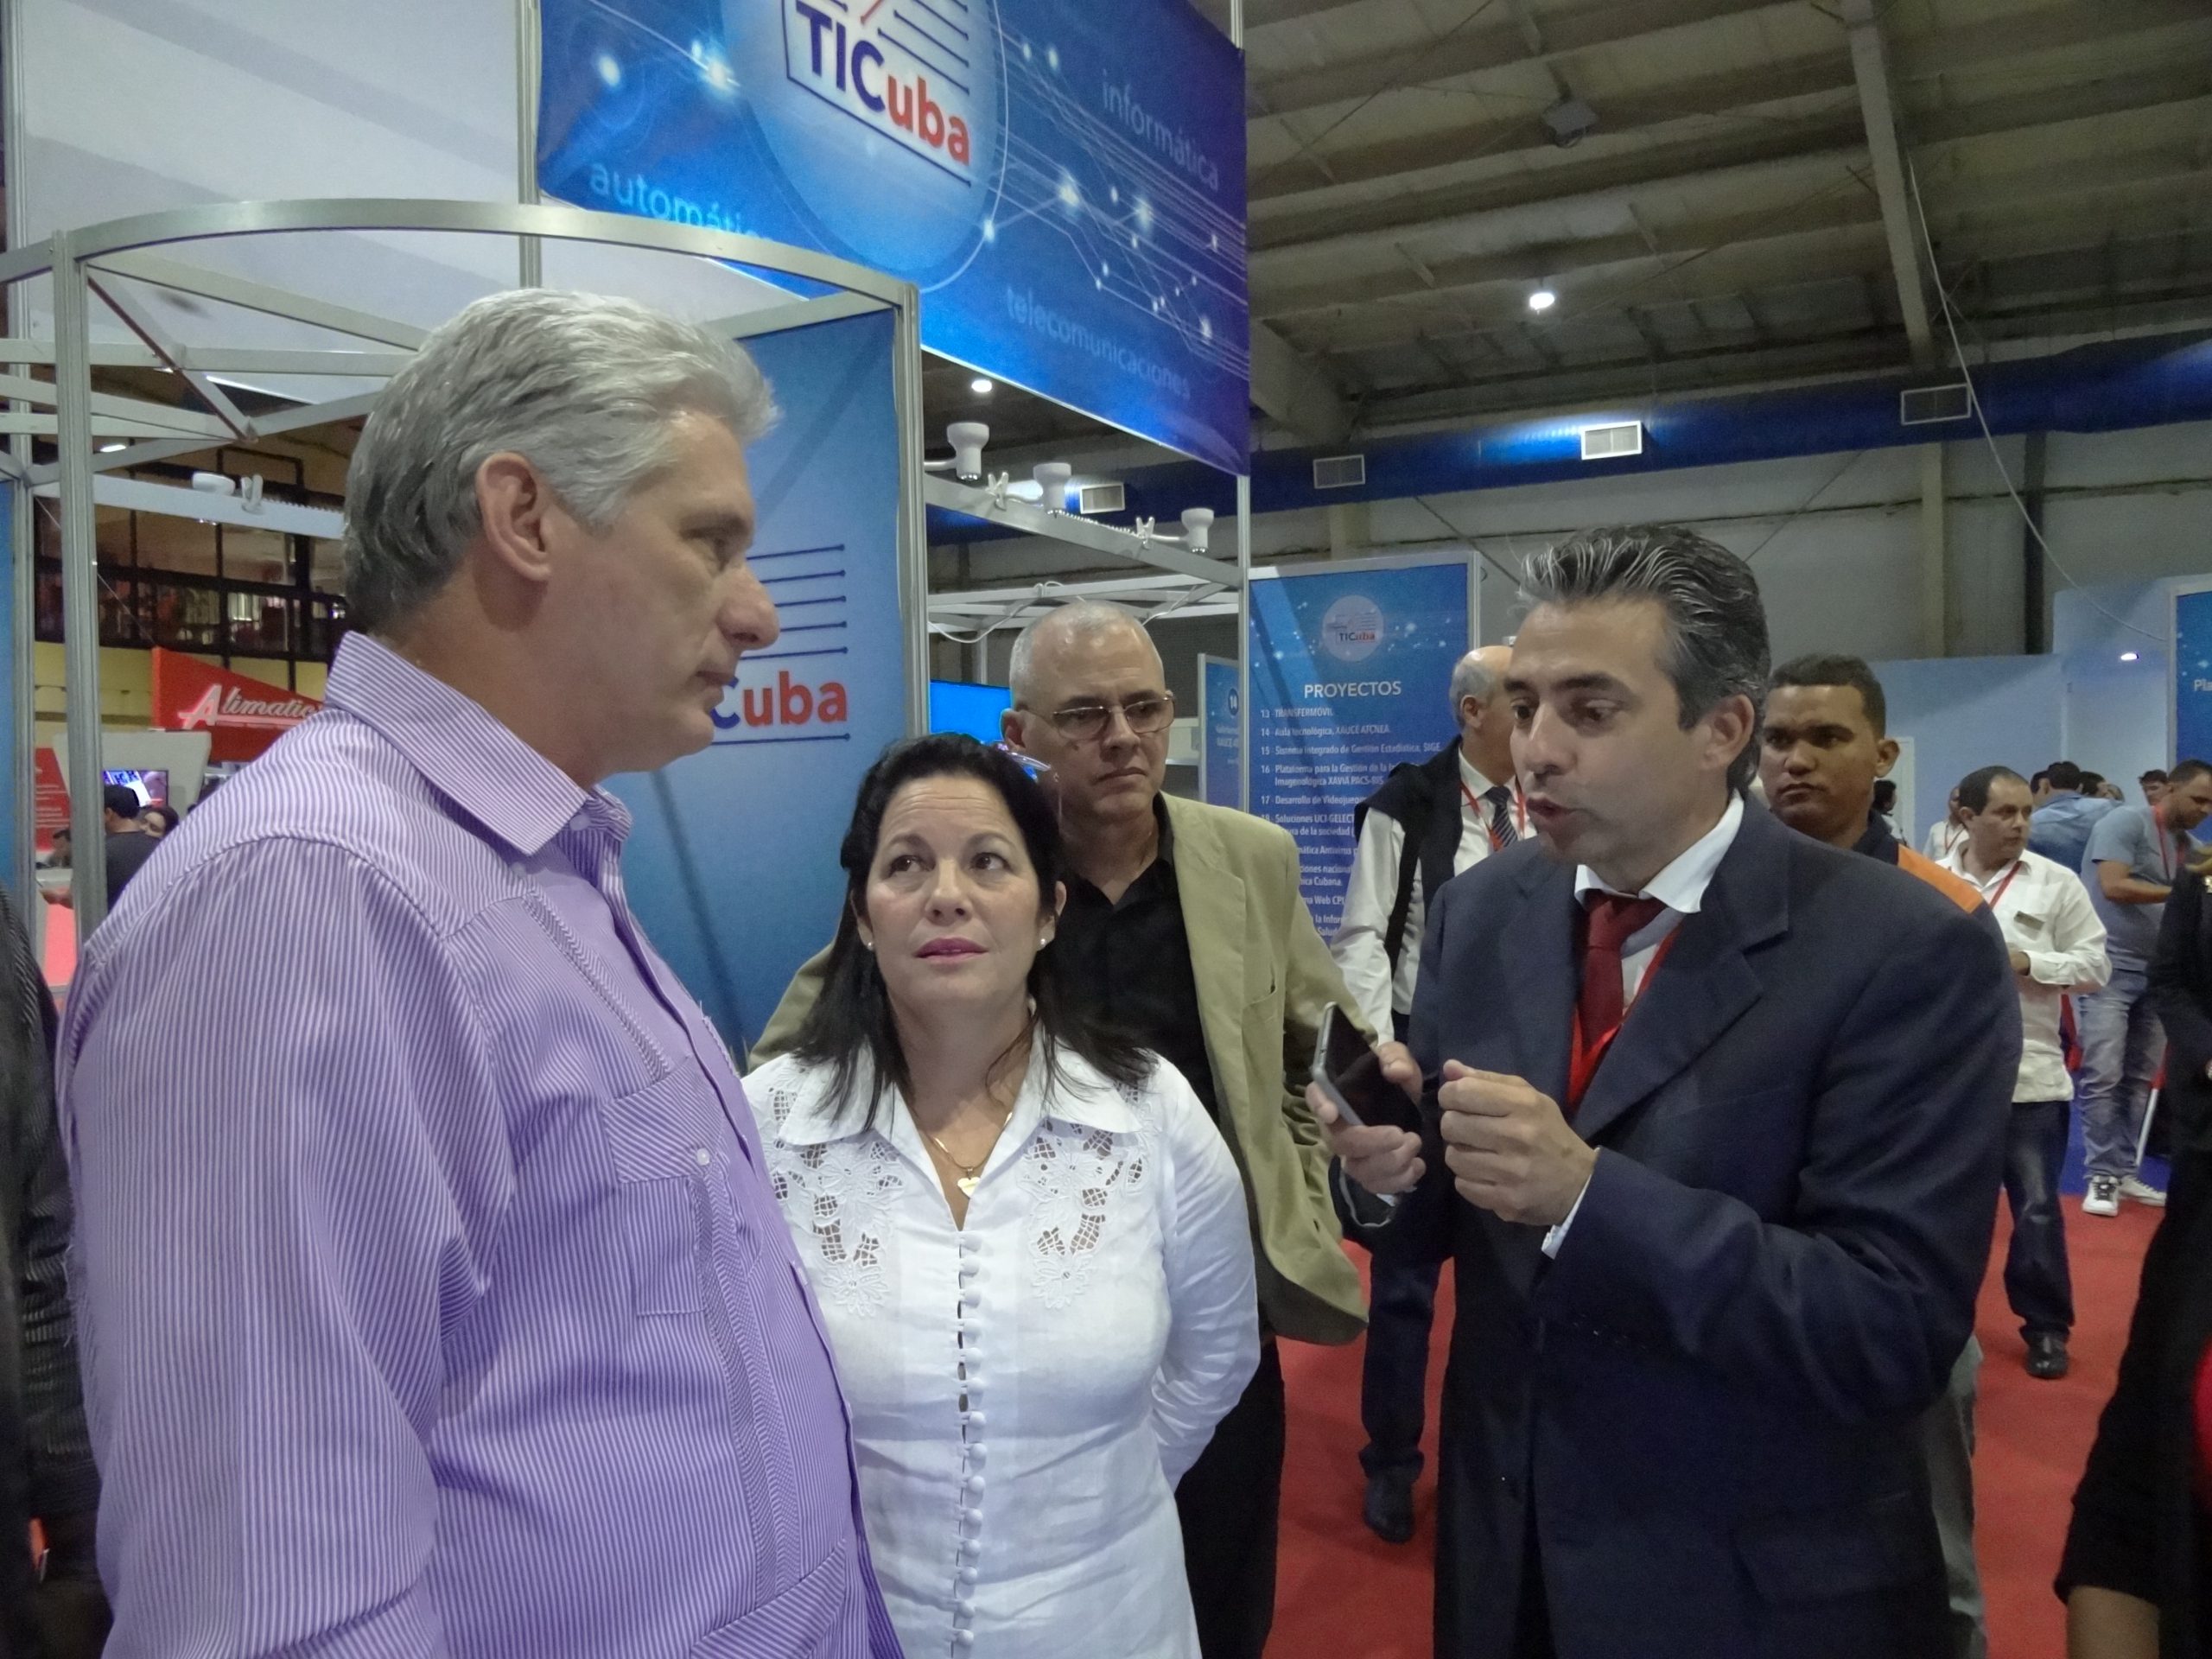 2018 Miguel Diaz-Canel, President of the Republic of Cuba, visits the Fair